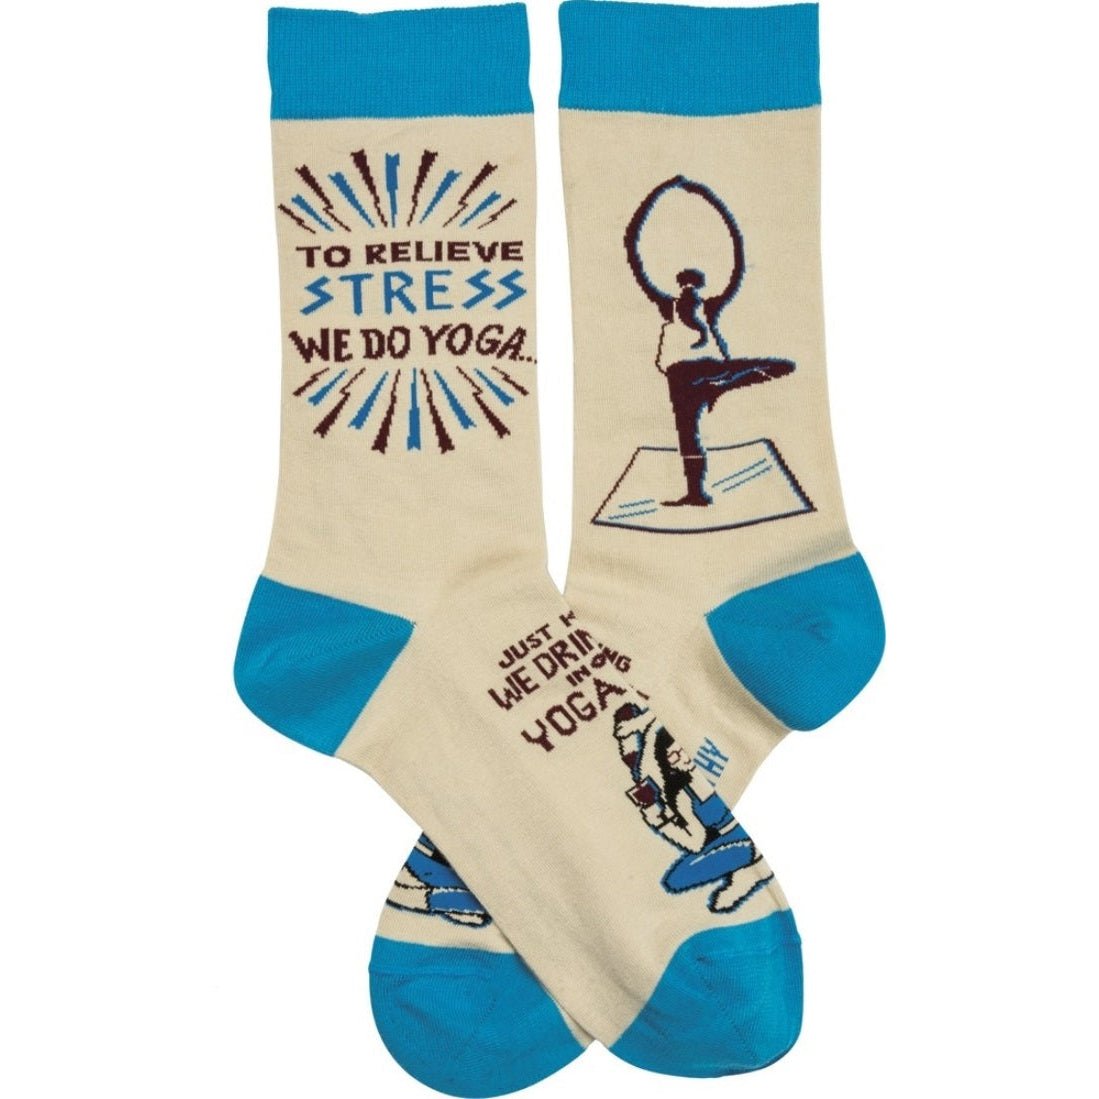 We Drink Wine In Our Yoga Pants Funny Novelty Socks